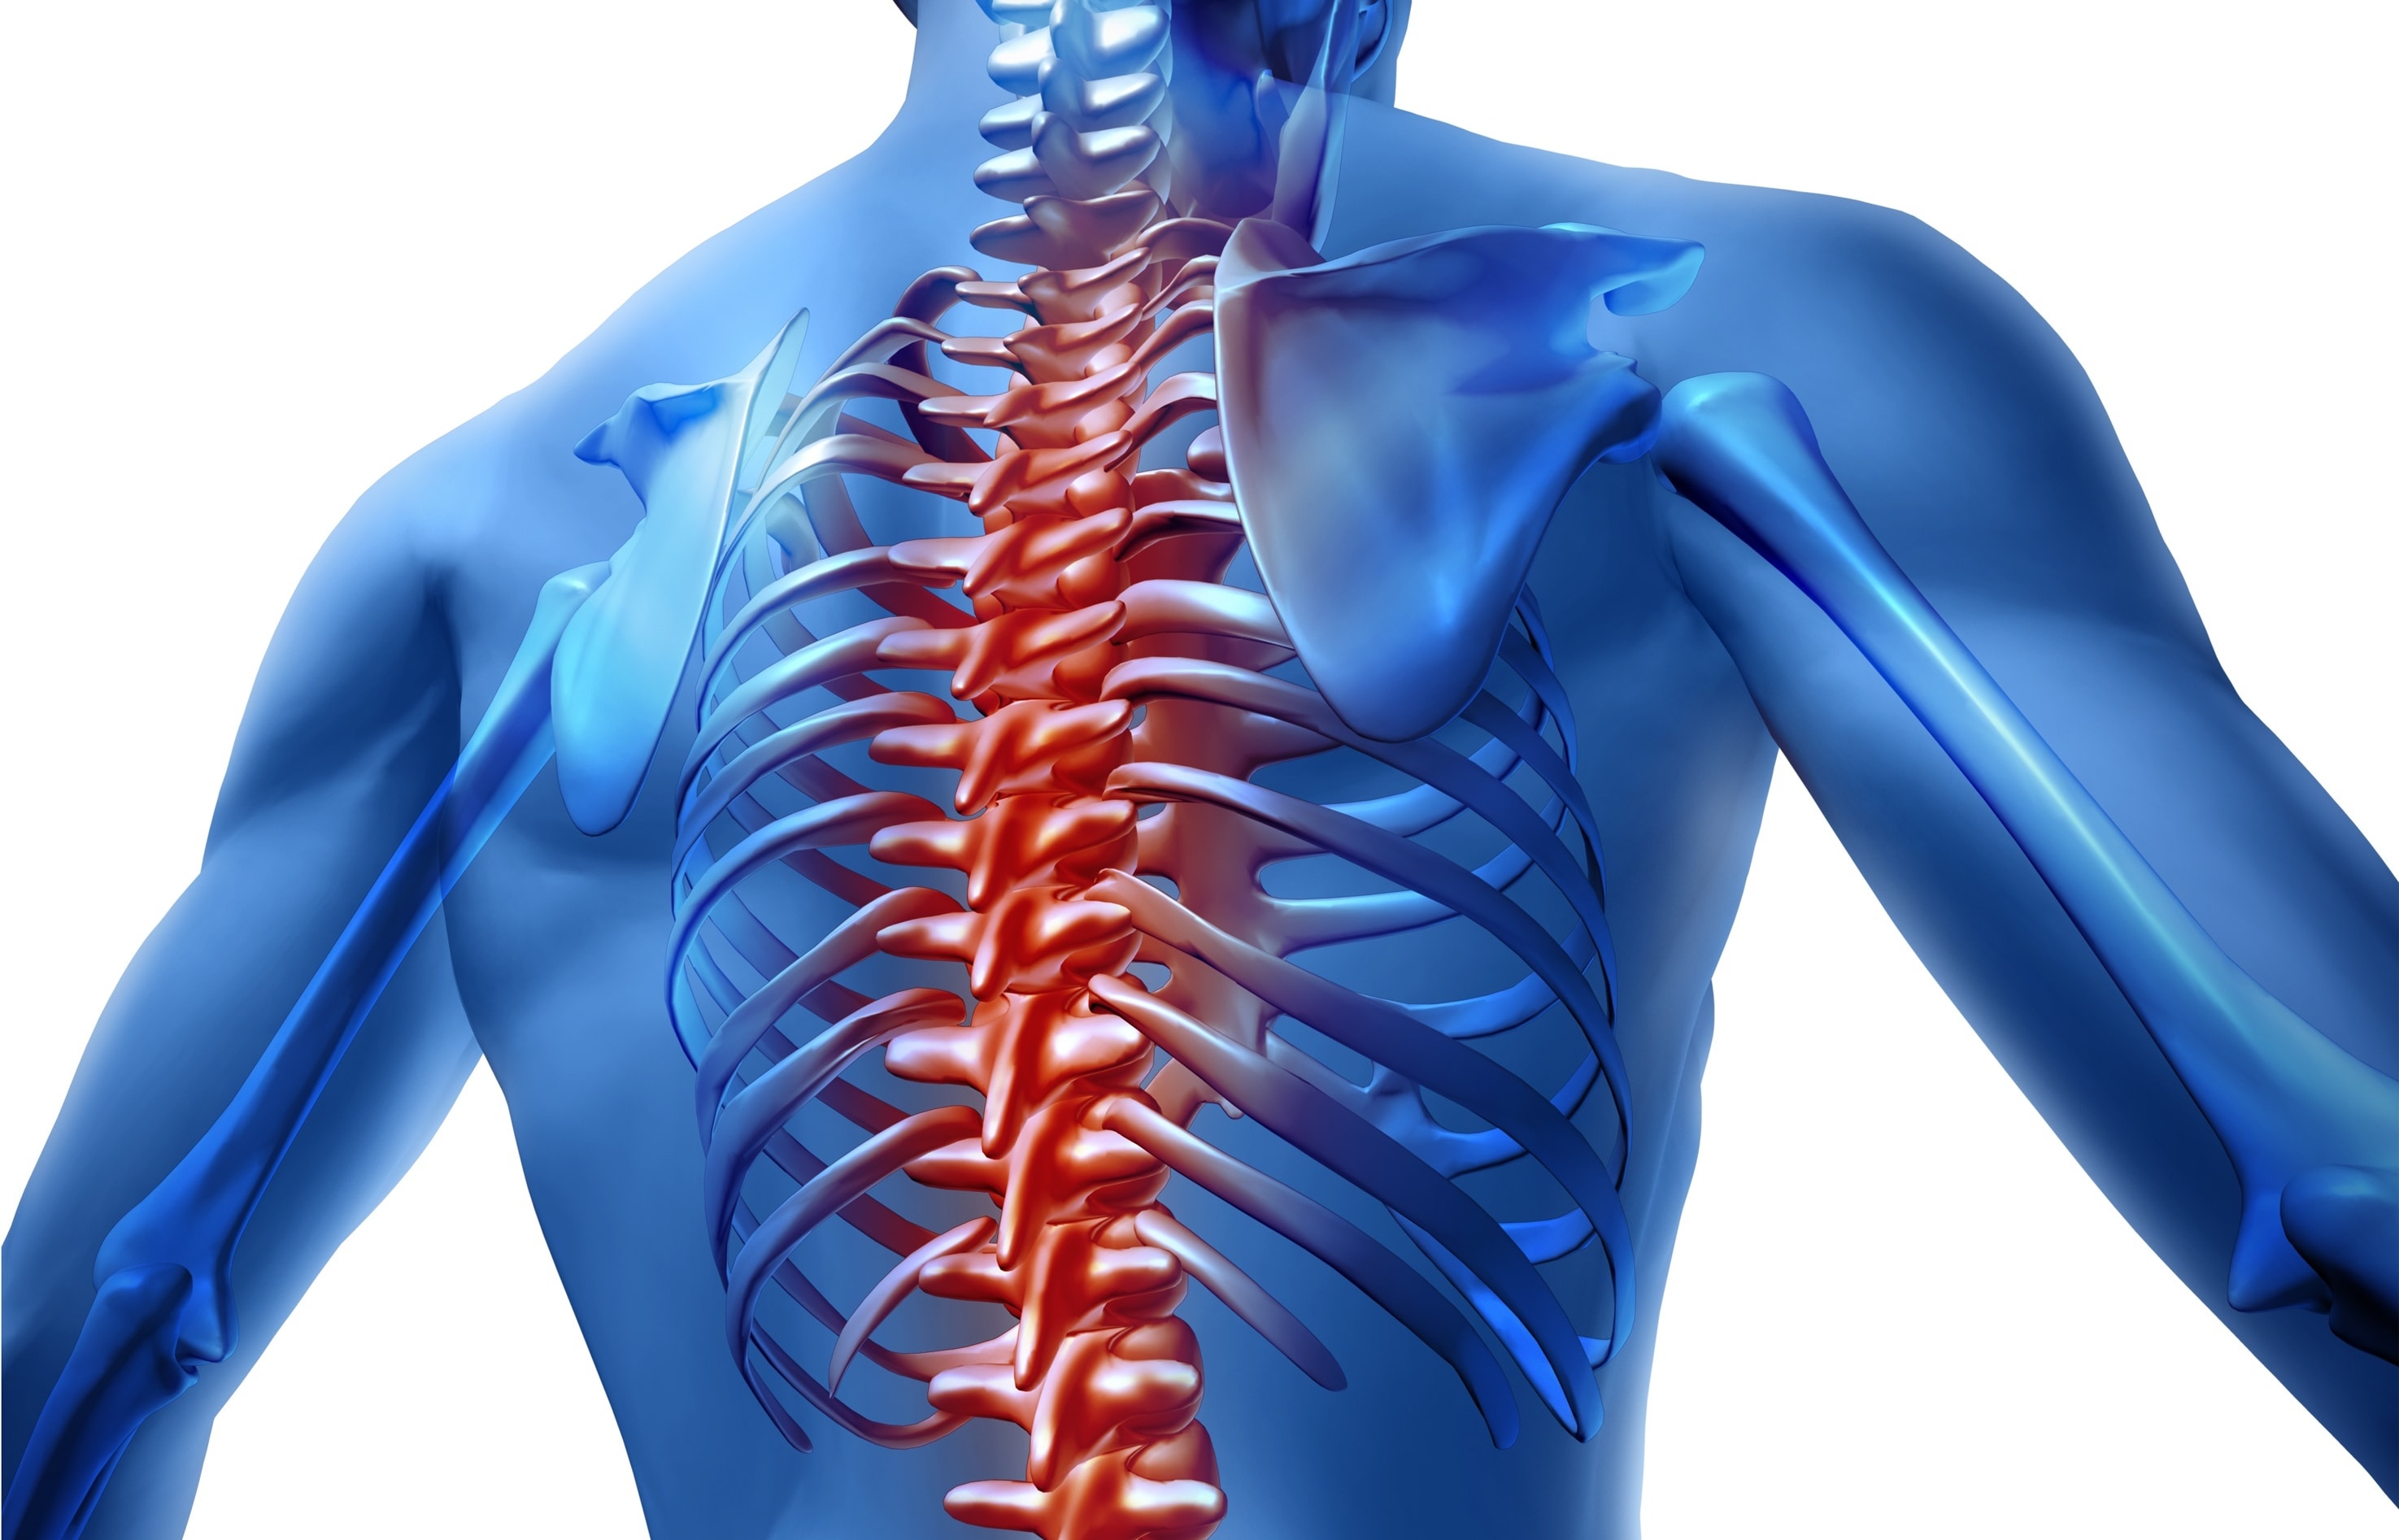 human body backache and back pain with an upper torso body skeleton showing the spine and vertebral column in red